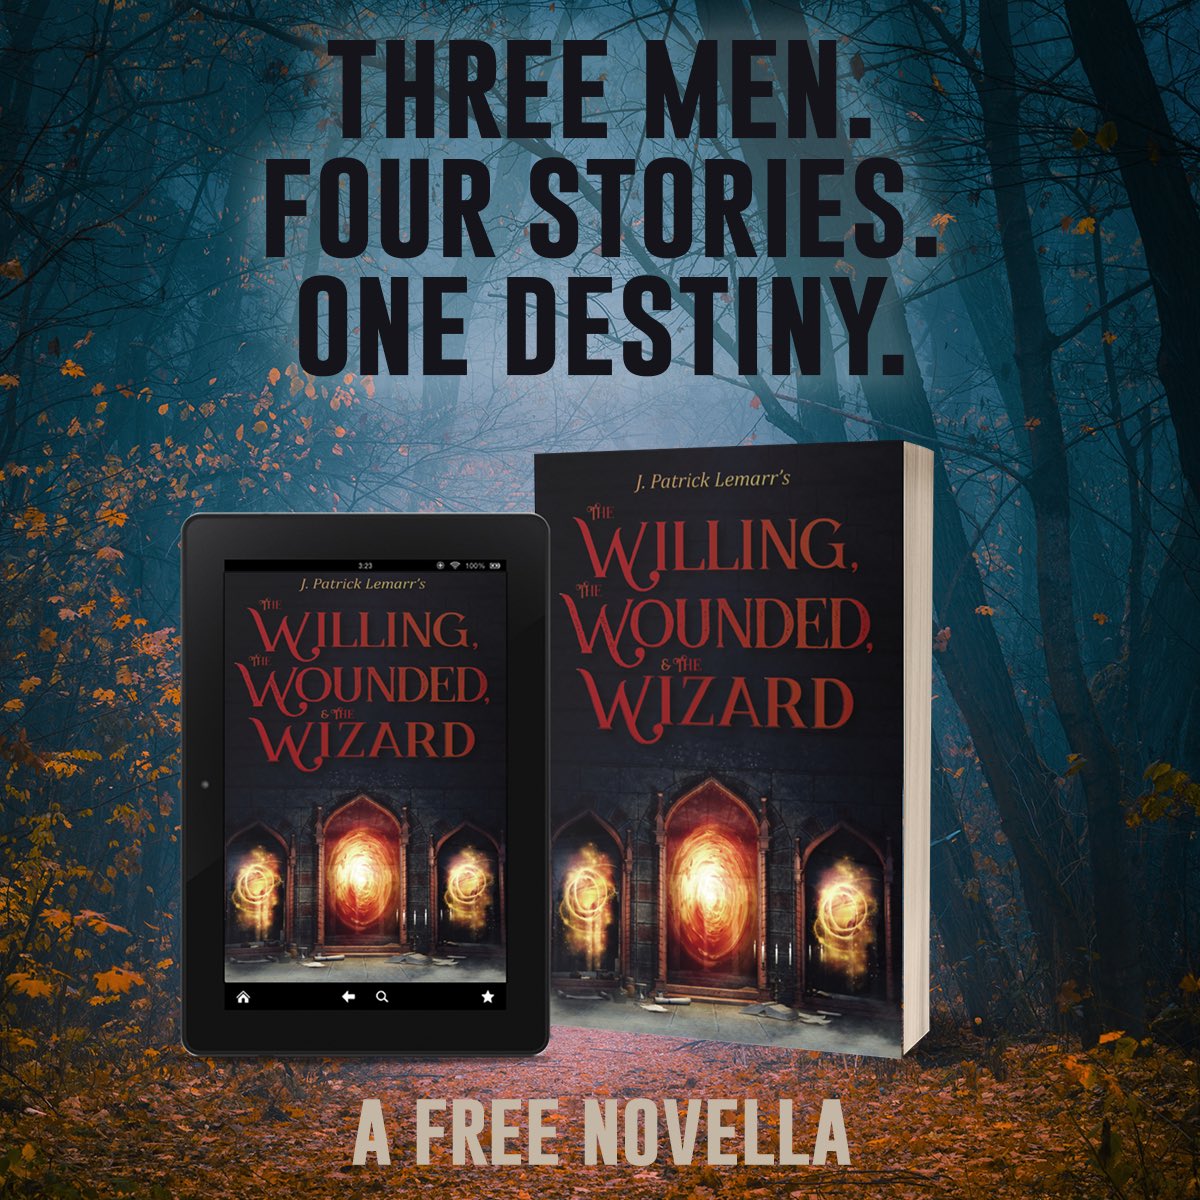 Start the new year with some FREE fiction. Download my brand-new novella for the eReader of your choice at dl.bookfunnel.com/oxd64ros3f and get to know Dylan Drake, his mentor, Darke, and that pesky wizard, Azael the Sly. #freefiction #indieauthors